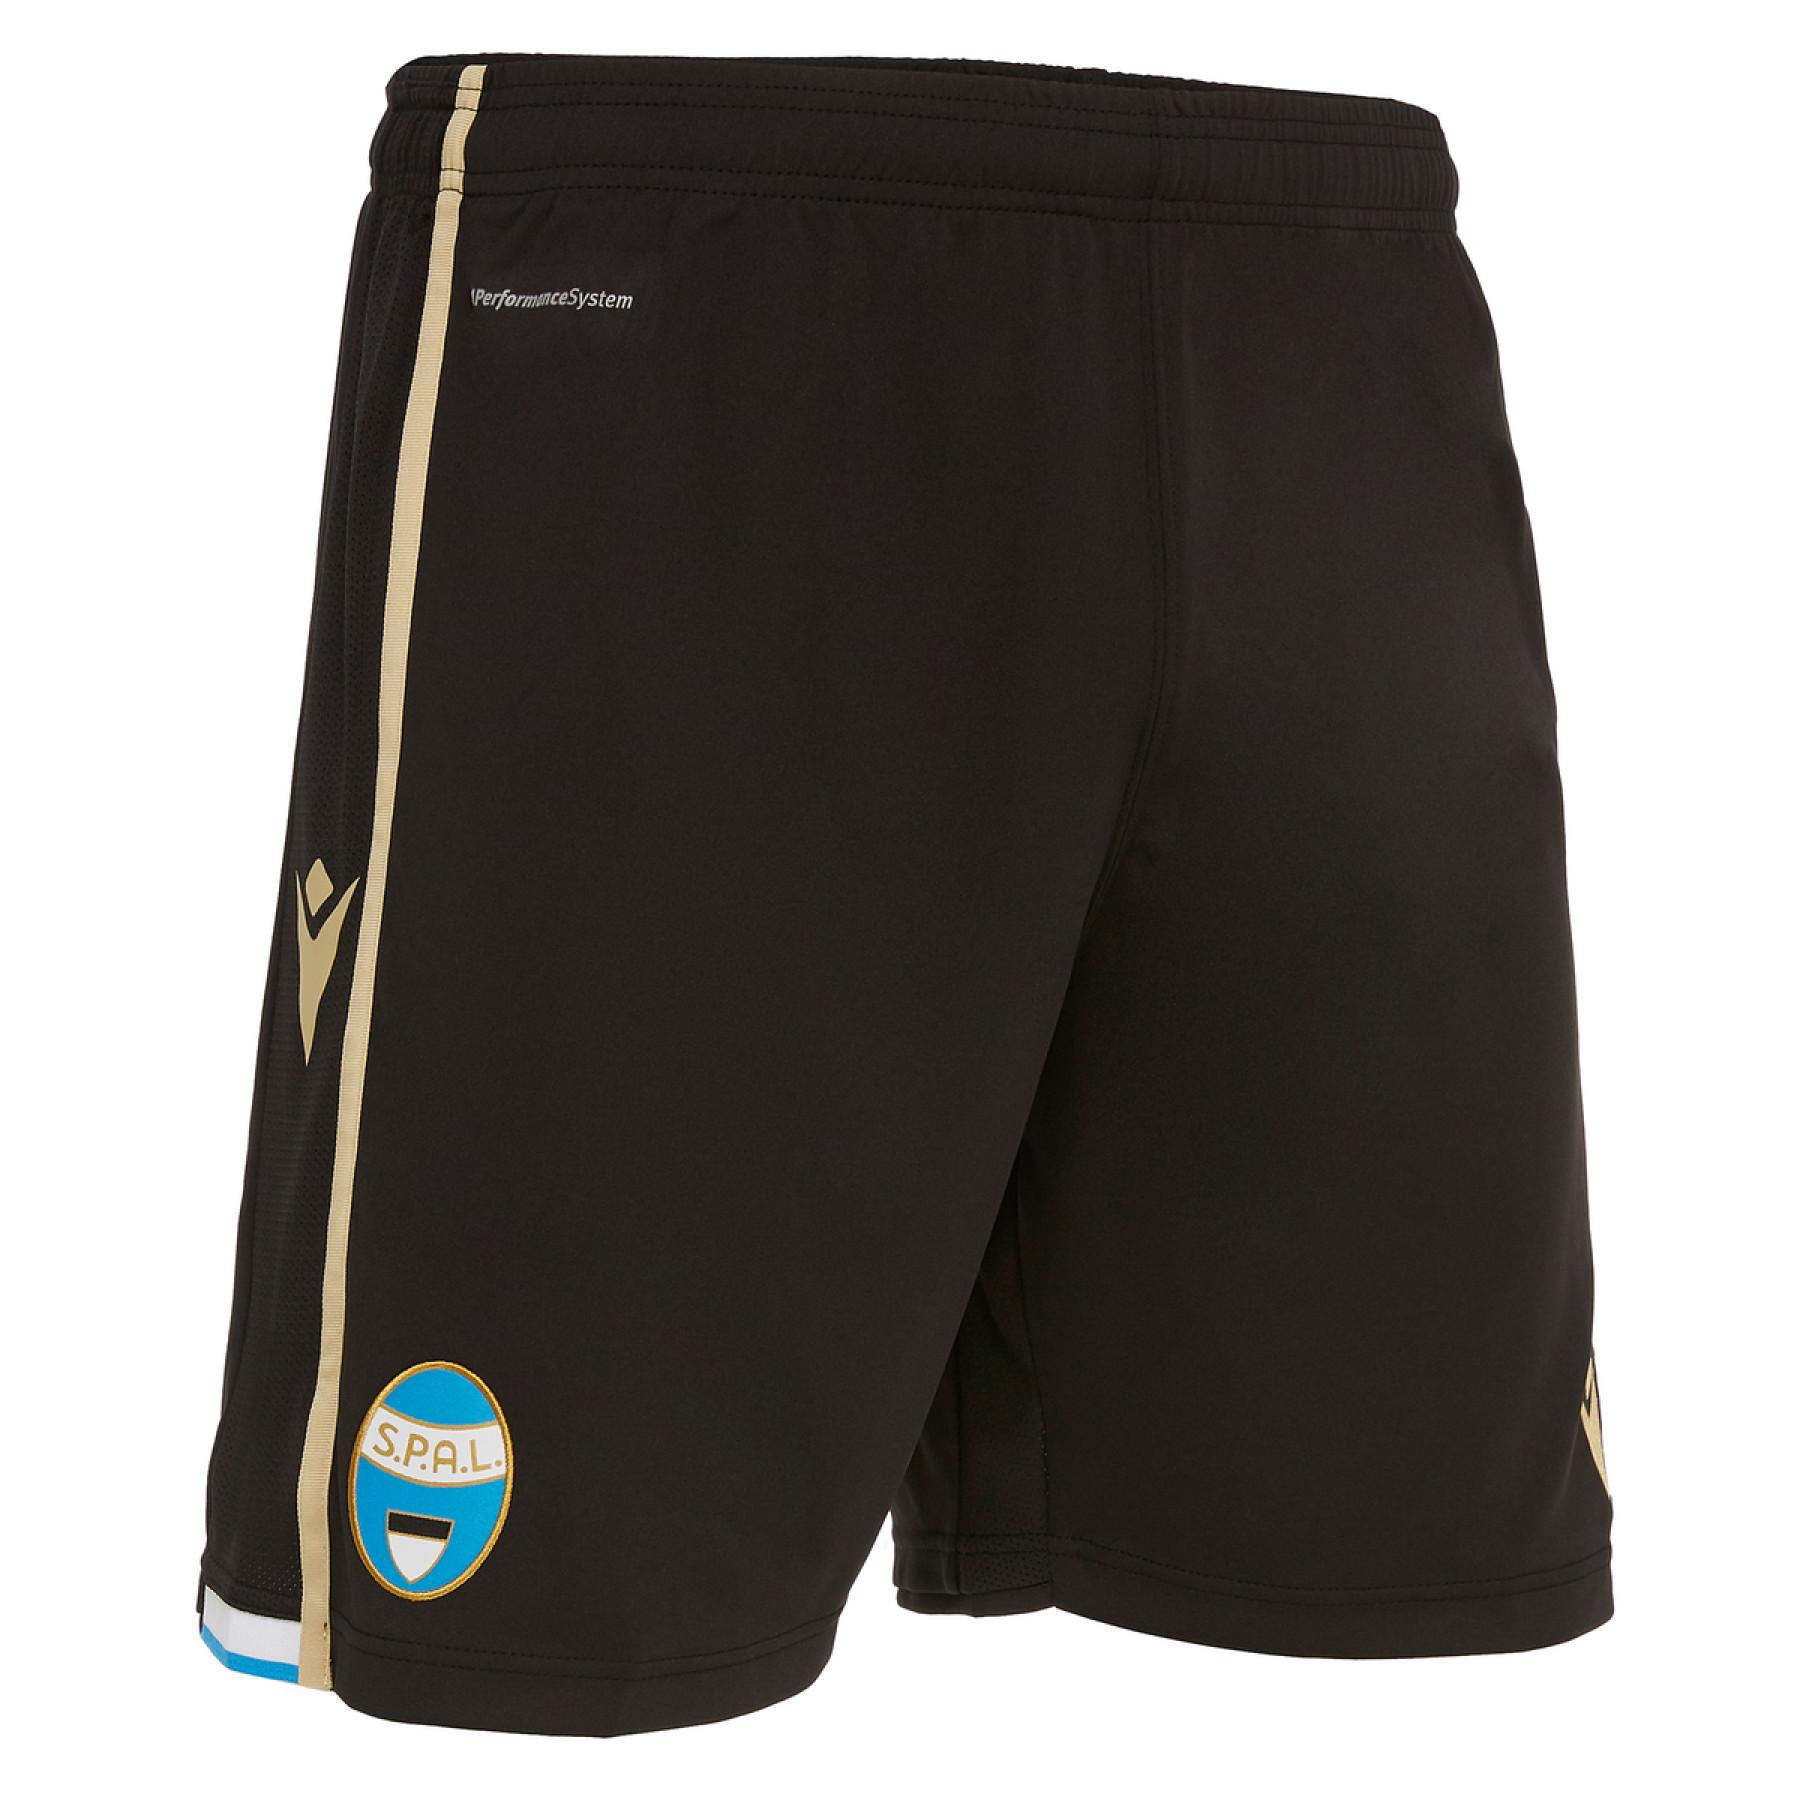 Outdoor-Shorts spal 2019/2020